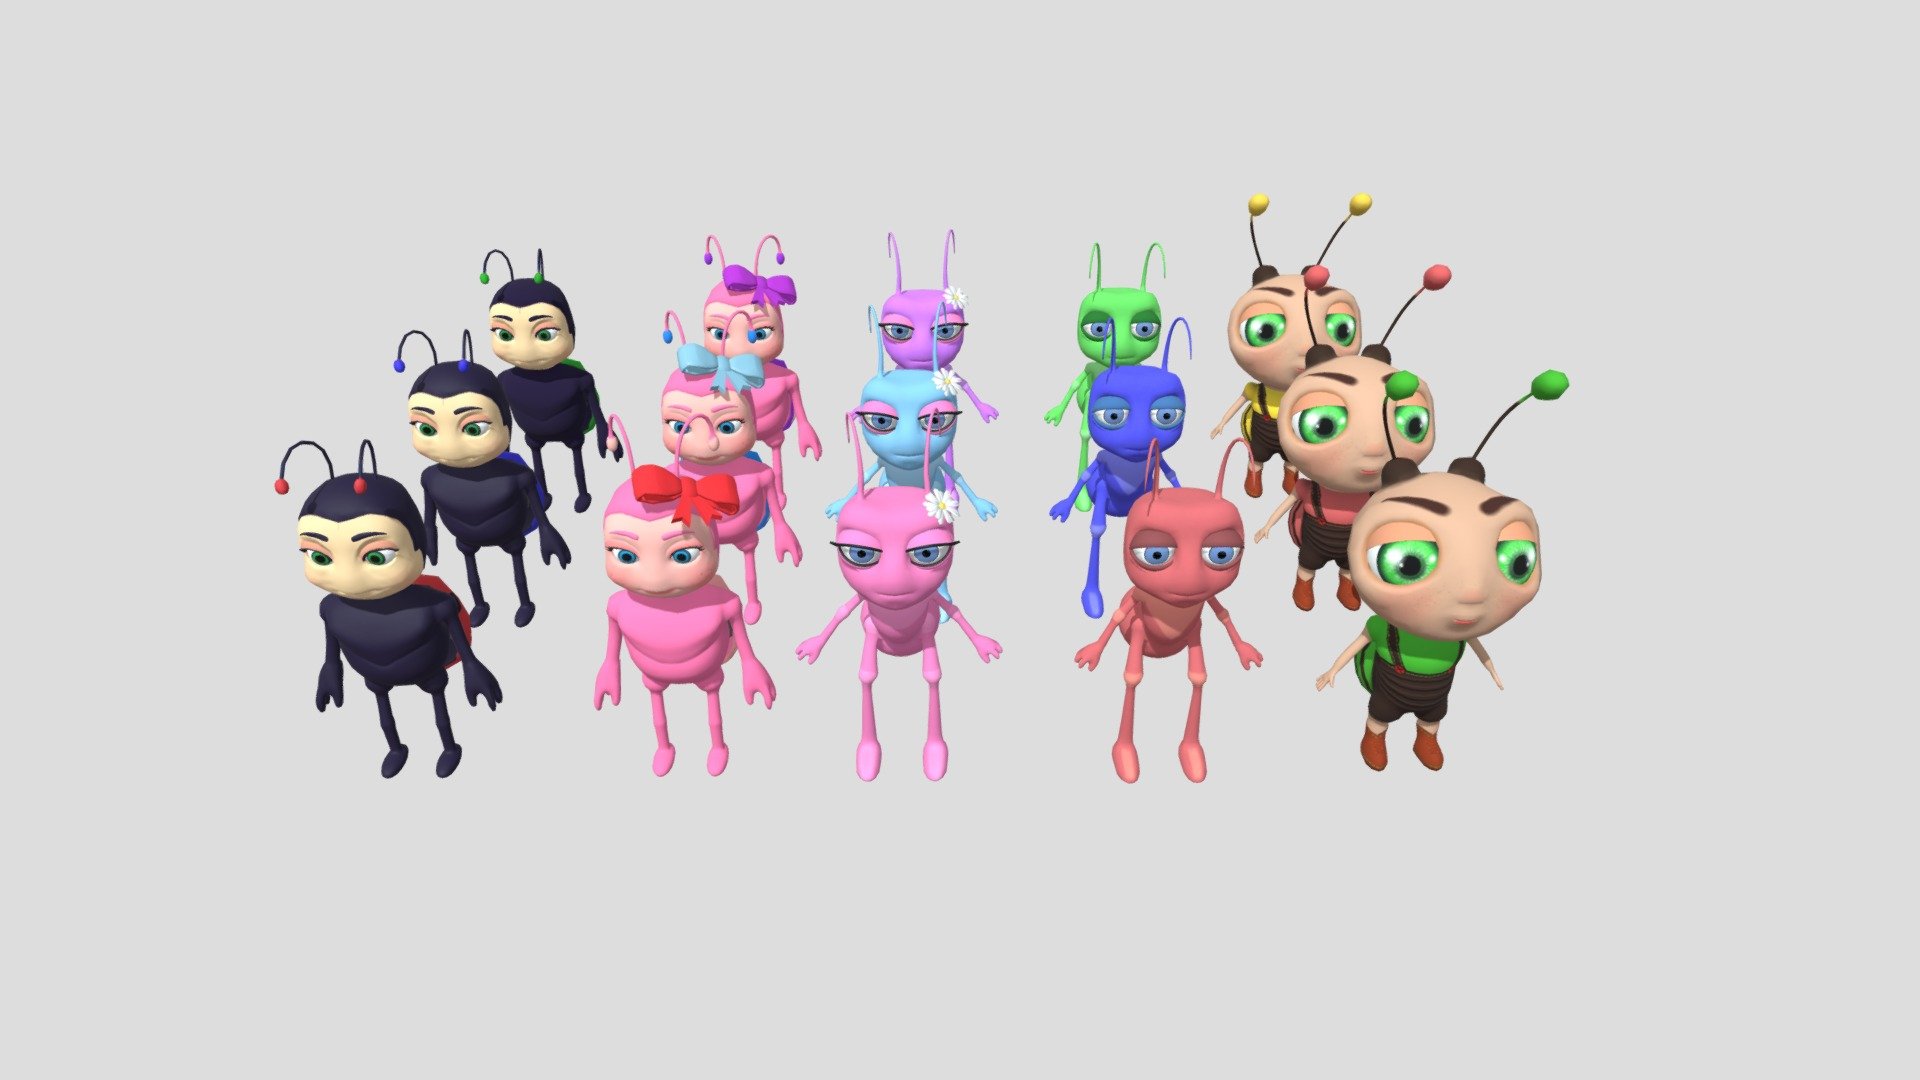 This package includes a variety of 3D models of different insects, which can be used to create cartoon insect-themed mobile games.
You can find a variety of high-quality, low-poly 3D models of different insects, including ants, ladybugs, and bees. Each character is fully rigged and animated, making them perfect for use in insect-themed games.

With this pack, you'll have everything you need to create a fun and engaging mobile game that will keep players coming back for more. So don't wait – download the Rigged LowPoly Bug Insects Ant Ladybug Bee Characters Pack today!

This pack includes Variations of Ants and Ladybugs.

Fully Rigged with Face Blendshapes.





Male Ladybug - 3 Color variations and flying animation




Female Ladybug - 3 Color variations and flying animation




Male Ant - 3 Color variations




Female Ant - 3 Color variations




Bee - 3 Color Variations


 - Insect Character Bundle: 15 Rigged Models - Buy Royalty Free 3D model by HayqArt 3d model